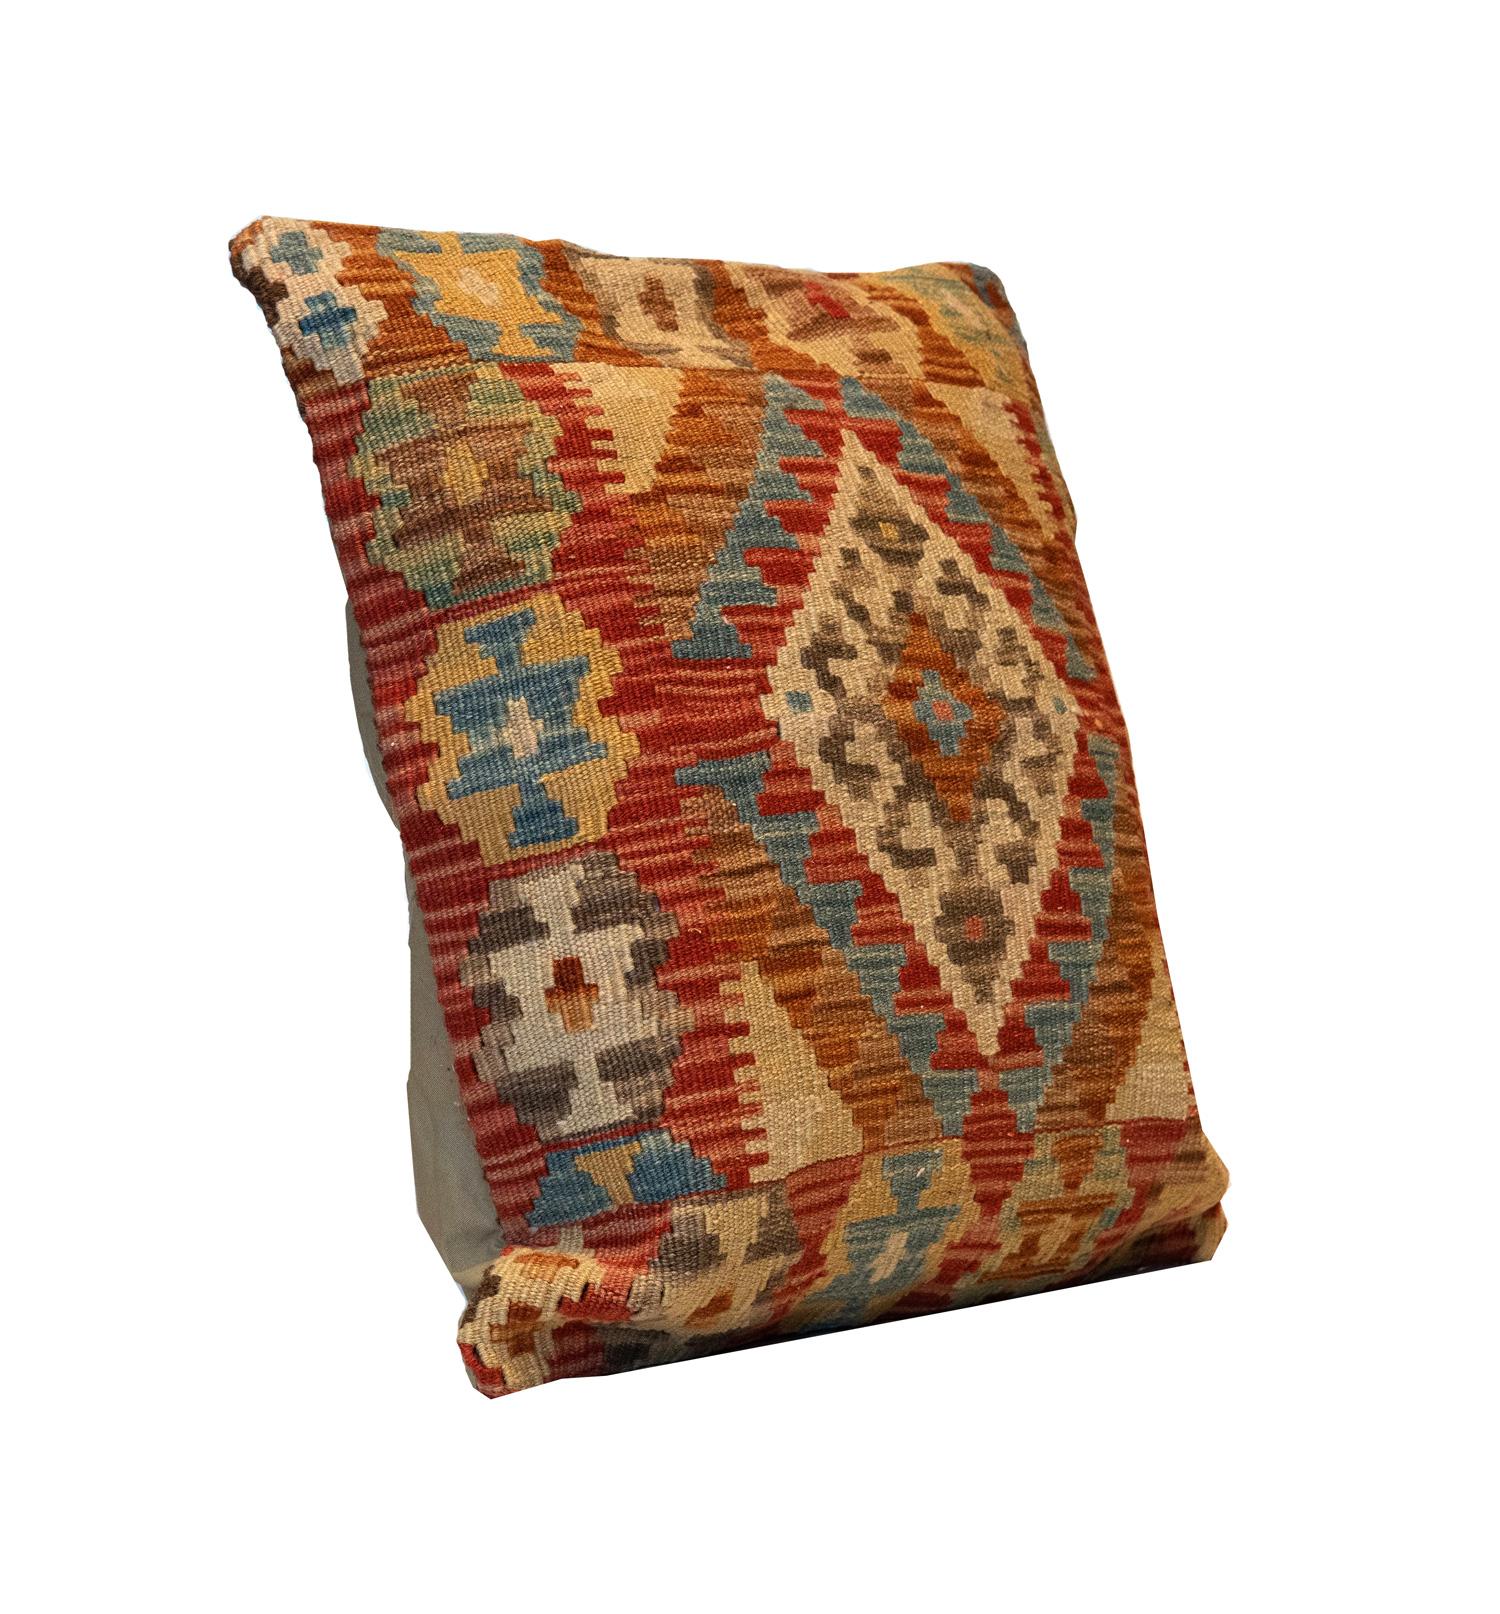 This simple cushion has been woven by hand using traditional kilim weaving techniques with hand-spun wool. The design features a conventional afghan geometric pattern, symmetrically woven with sophistication. This rustic cushion is a great piece to